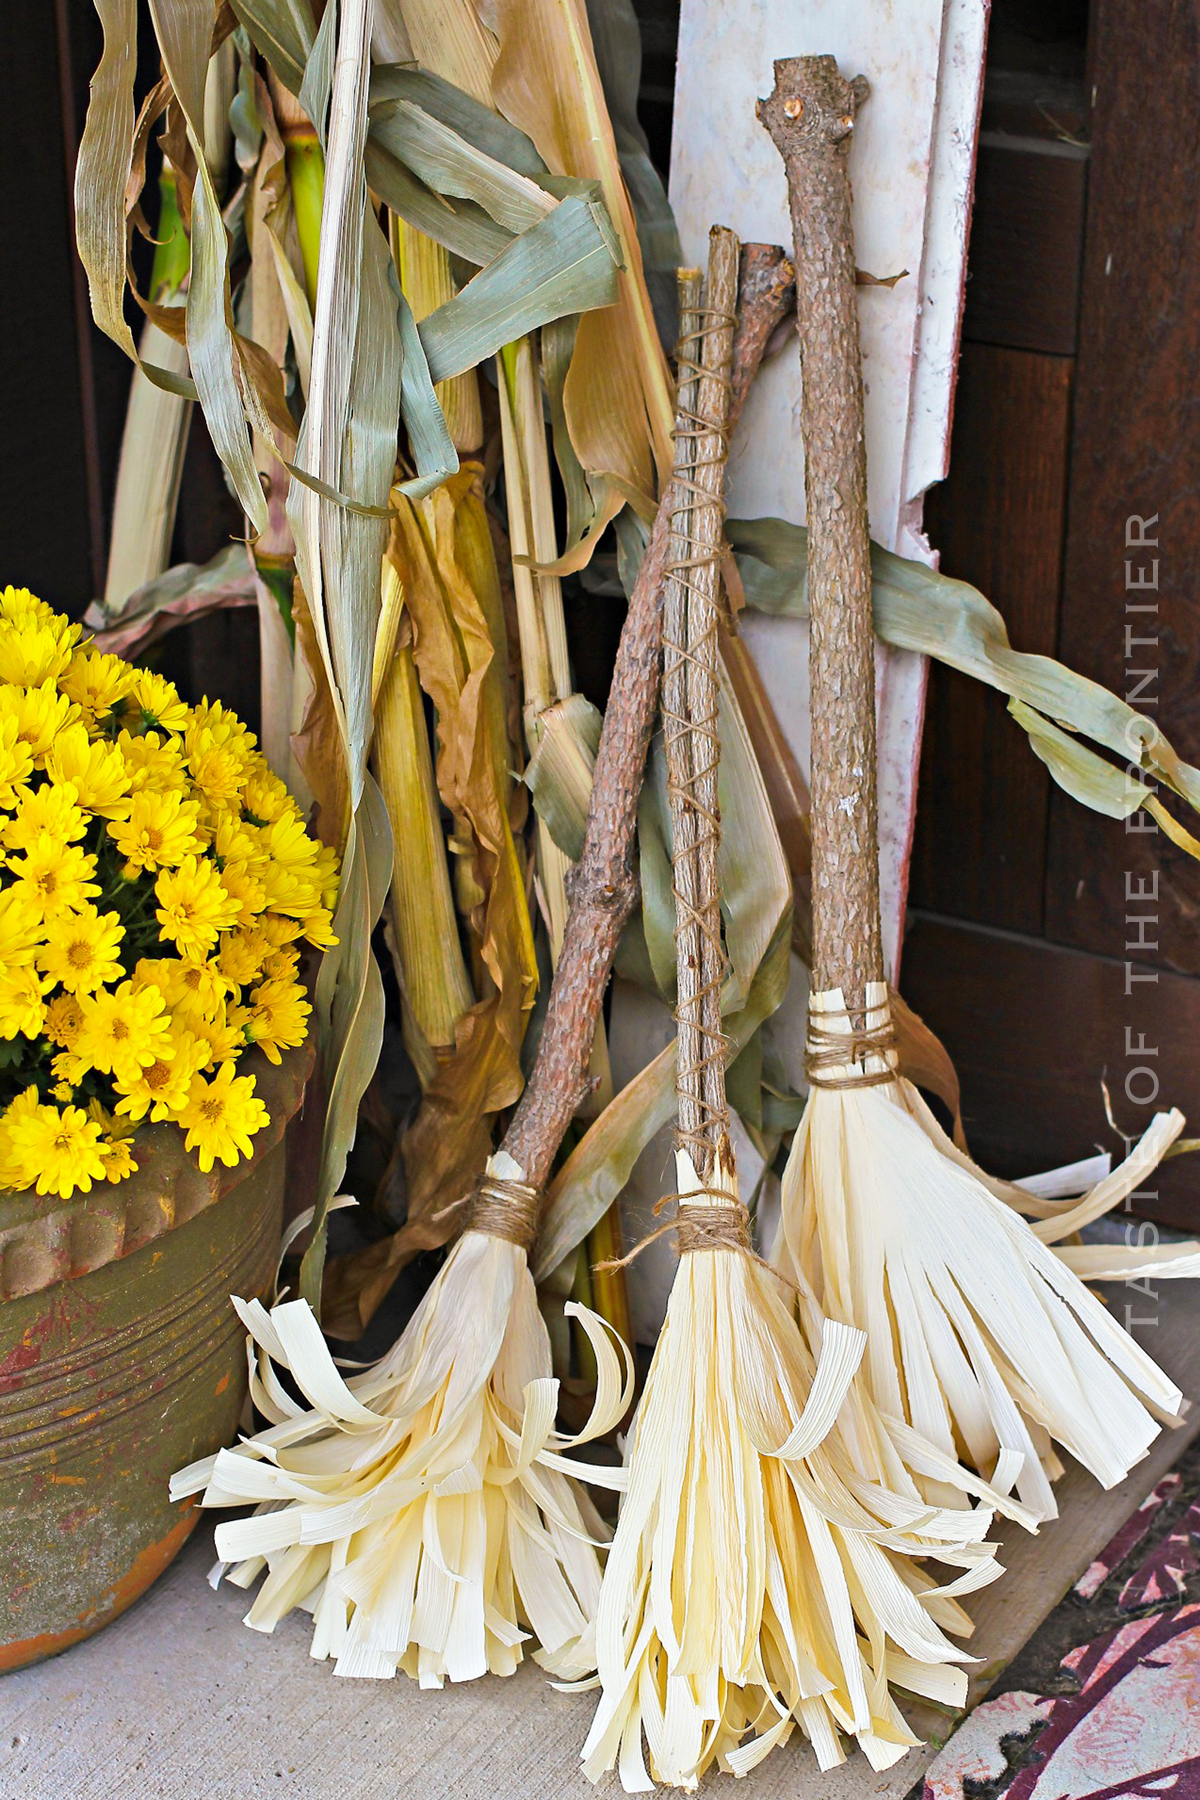 Corn Husk Crafts for the Porch